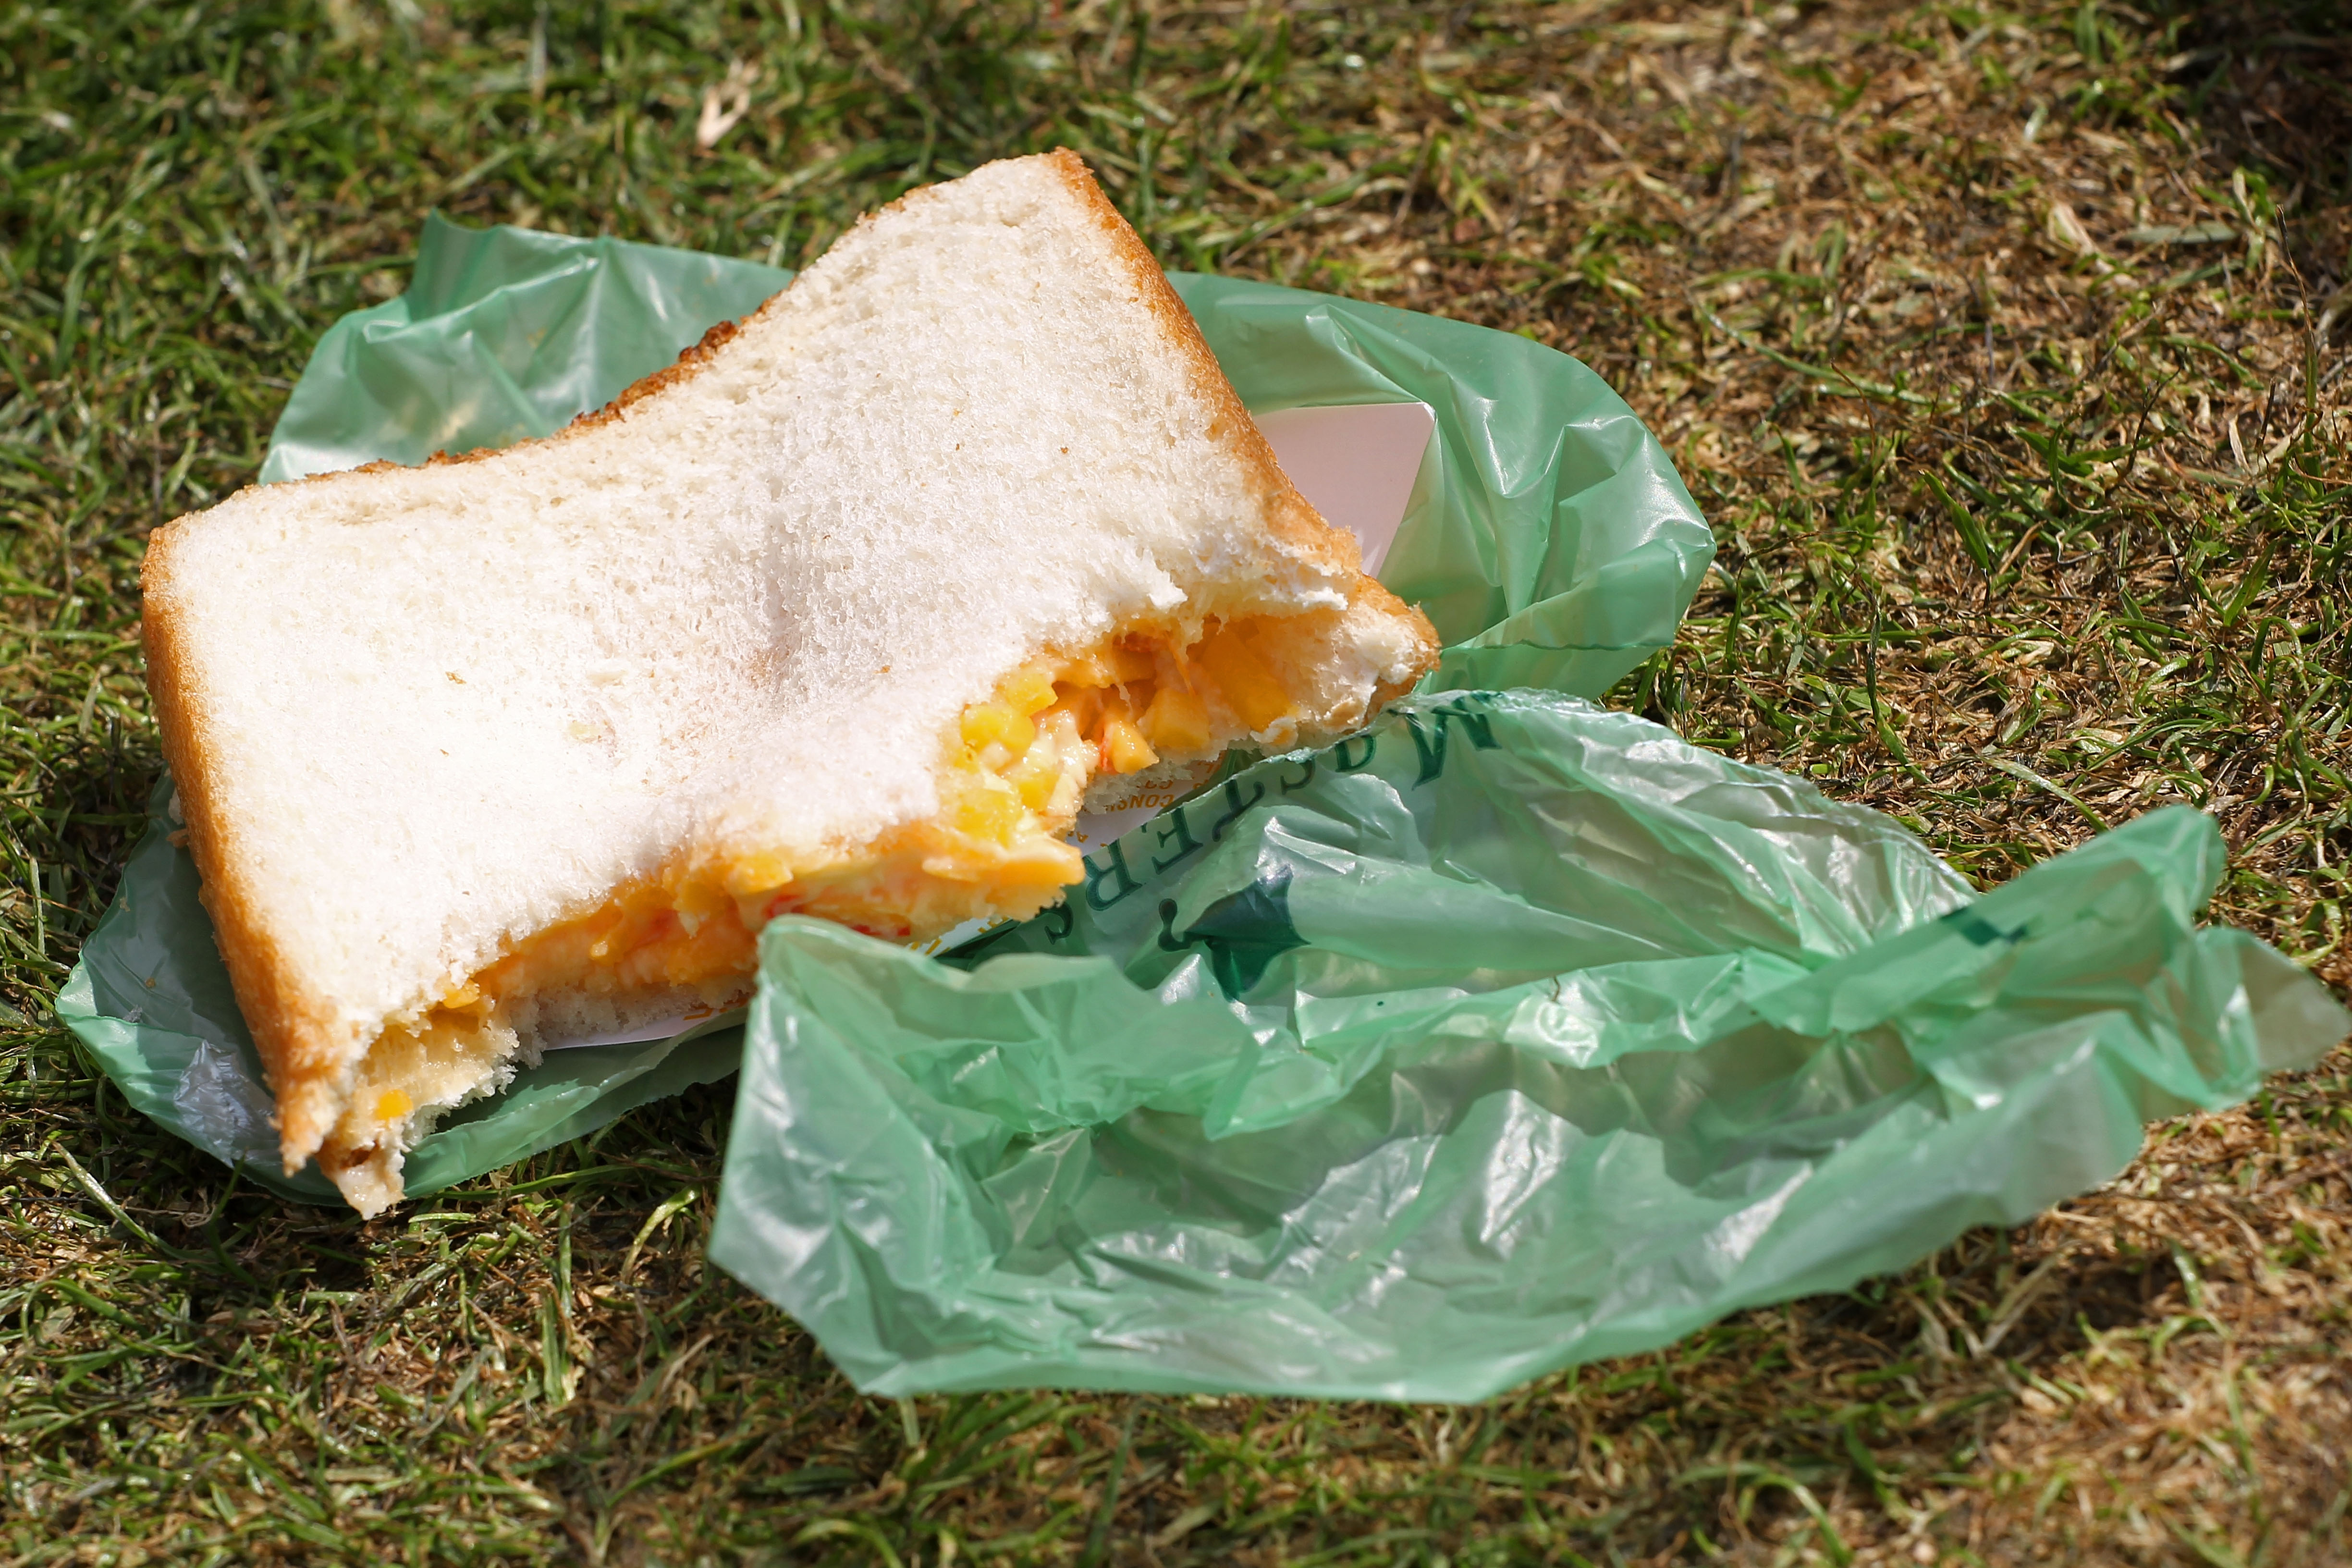 The History of the $1.50 Masters Pimento Cheese Sandwich